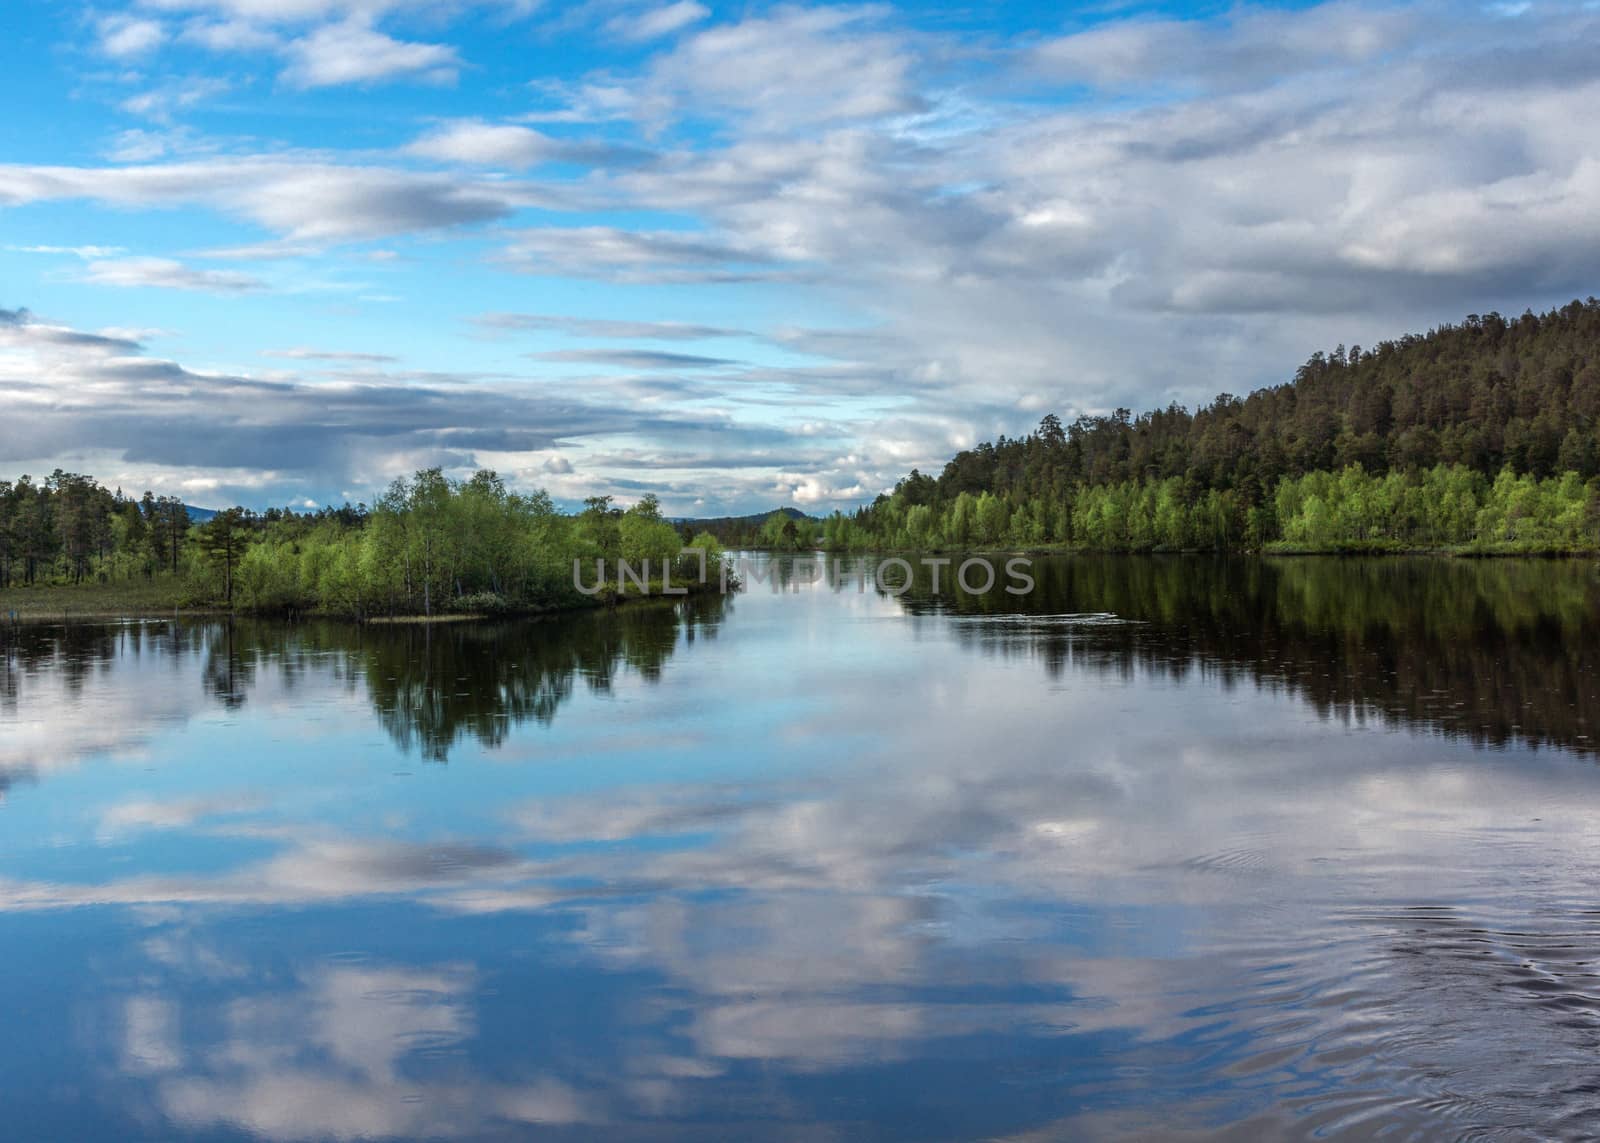 Plenty of water and forests under blue skies filled with all kind of clouds, all mirrored in lake.